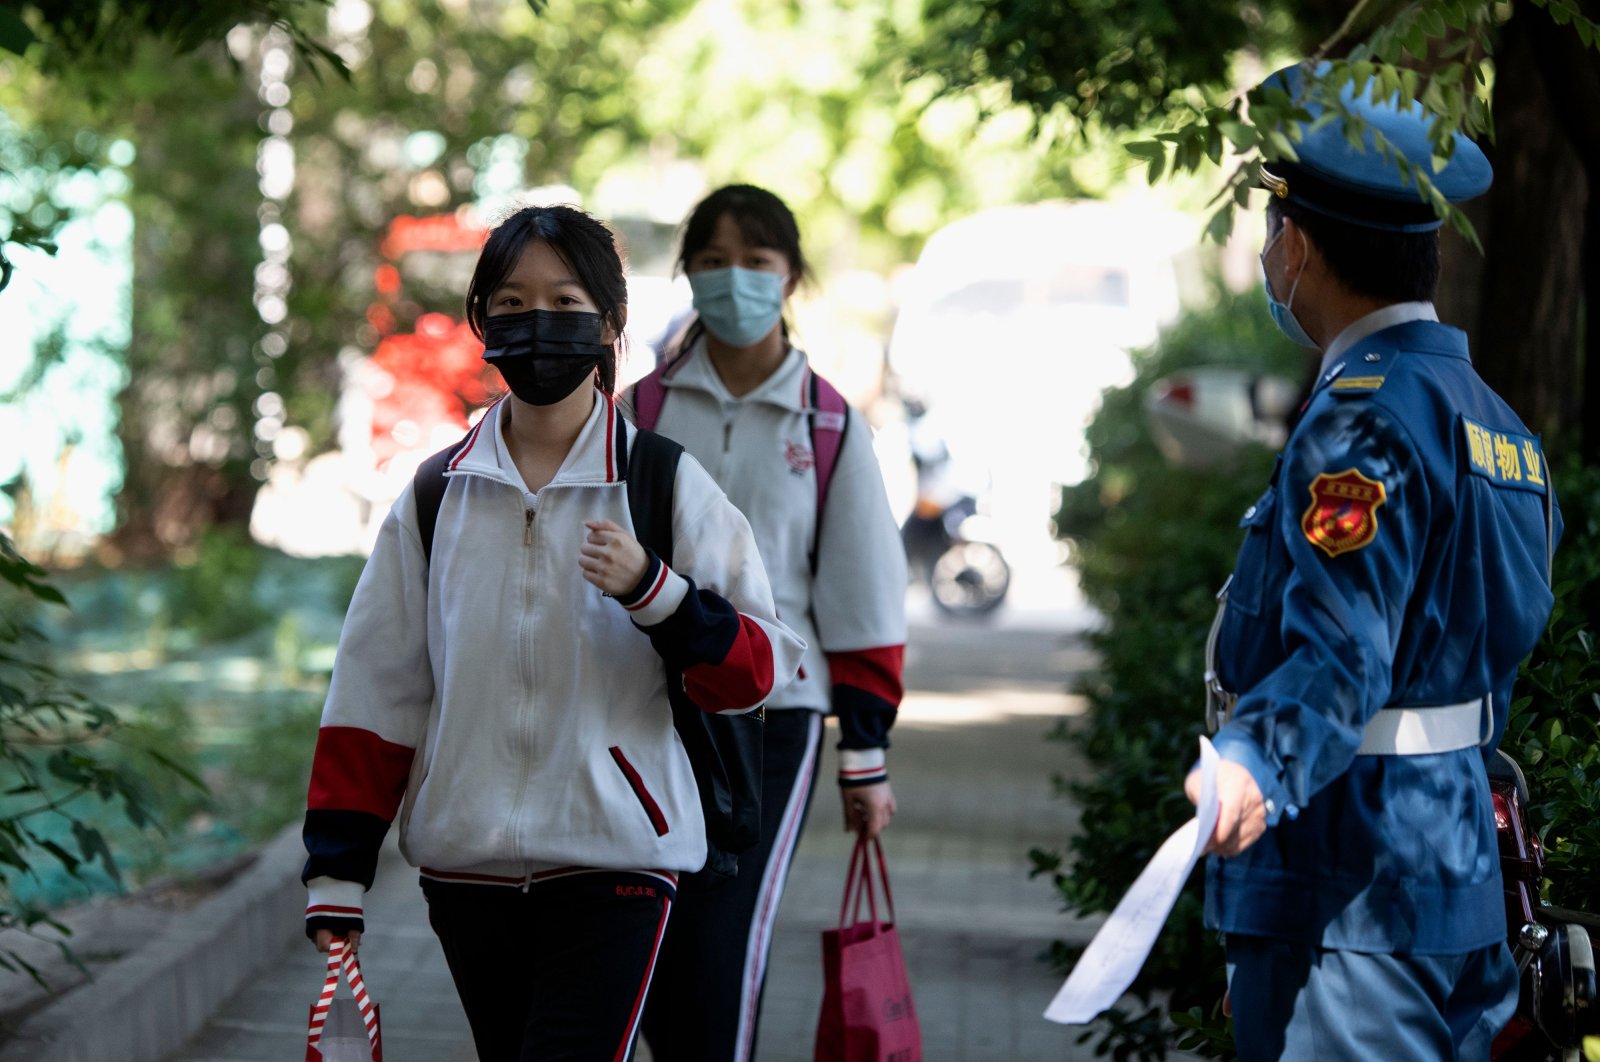 Students wearing face masks over concerns about the coronavirus arrive at a middle school in Beijing, China, May 11, 2020. (AFP Photo)